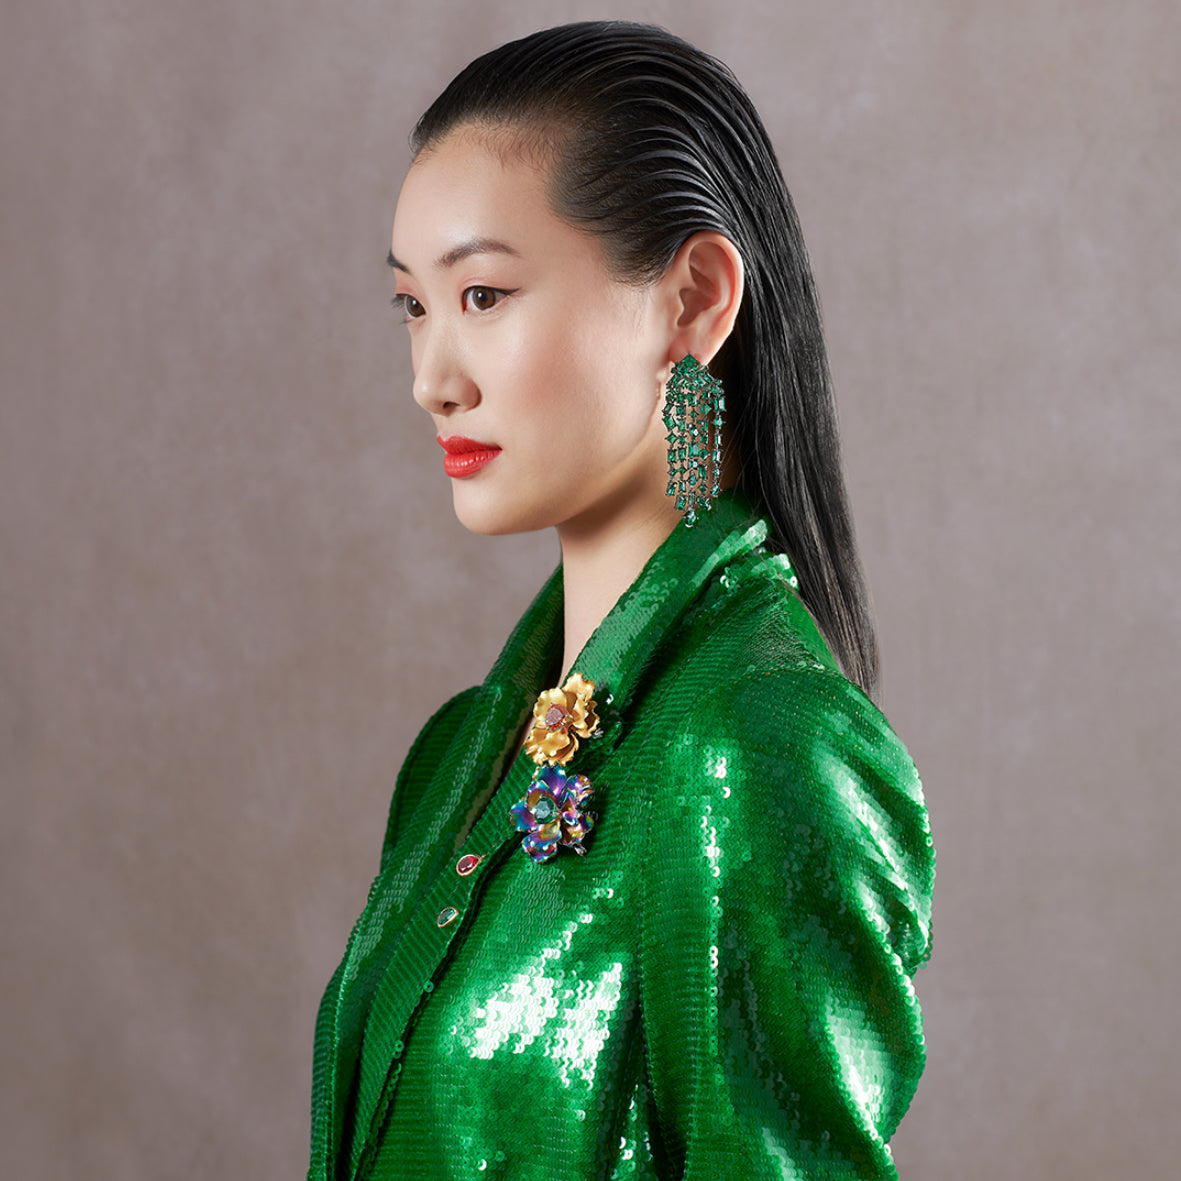 Emerald Cascade Earrings, Earrings, Anabela Chan Joaillerie - Fine jewelry with laboratory grown and created gemstones hand-crafted in the United Kingdom. Anabela Chan Joaillerie is the first fine jewellery brand in the world to champion laboratory-grown and created gemstones with high jewellery design, artisanal craftsmanship and a focus on ethical and sustainable innovations.